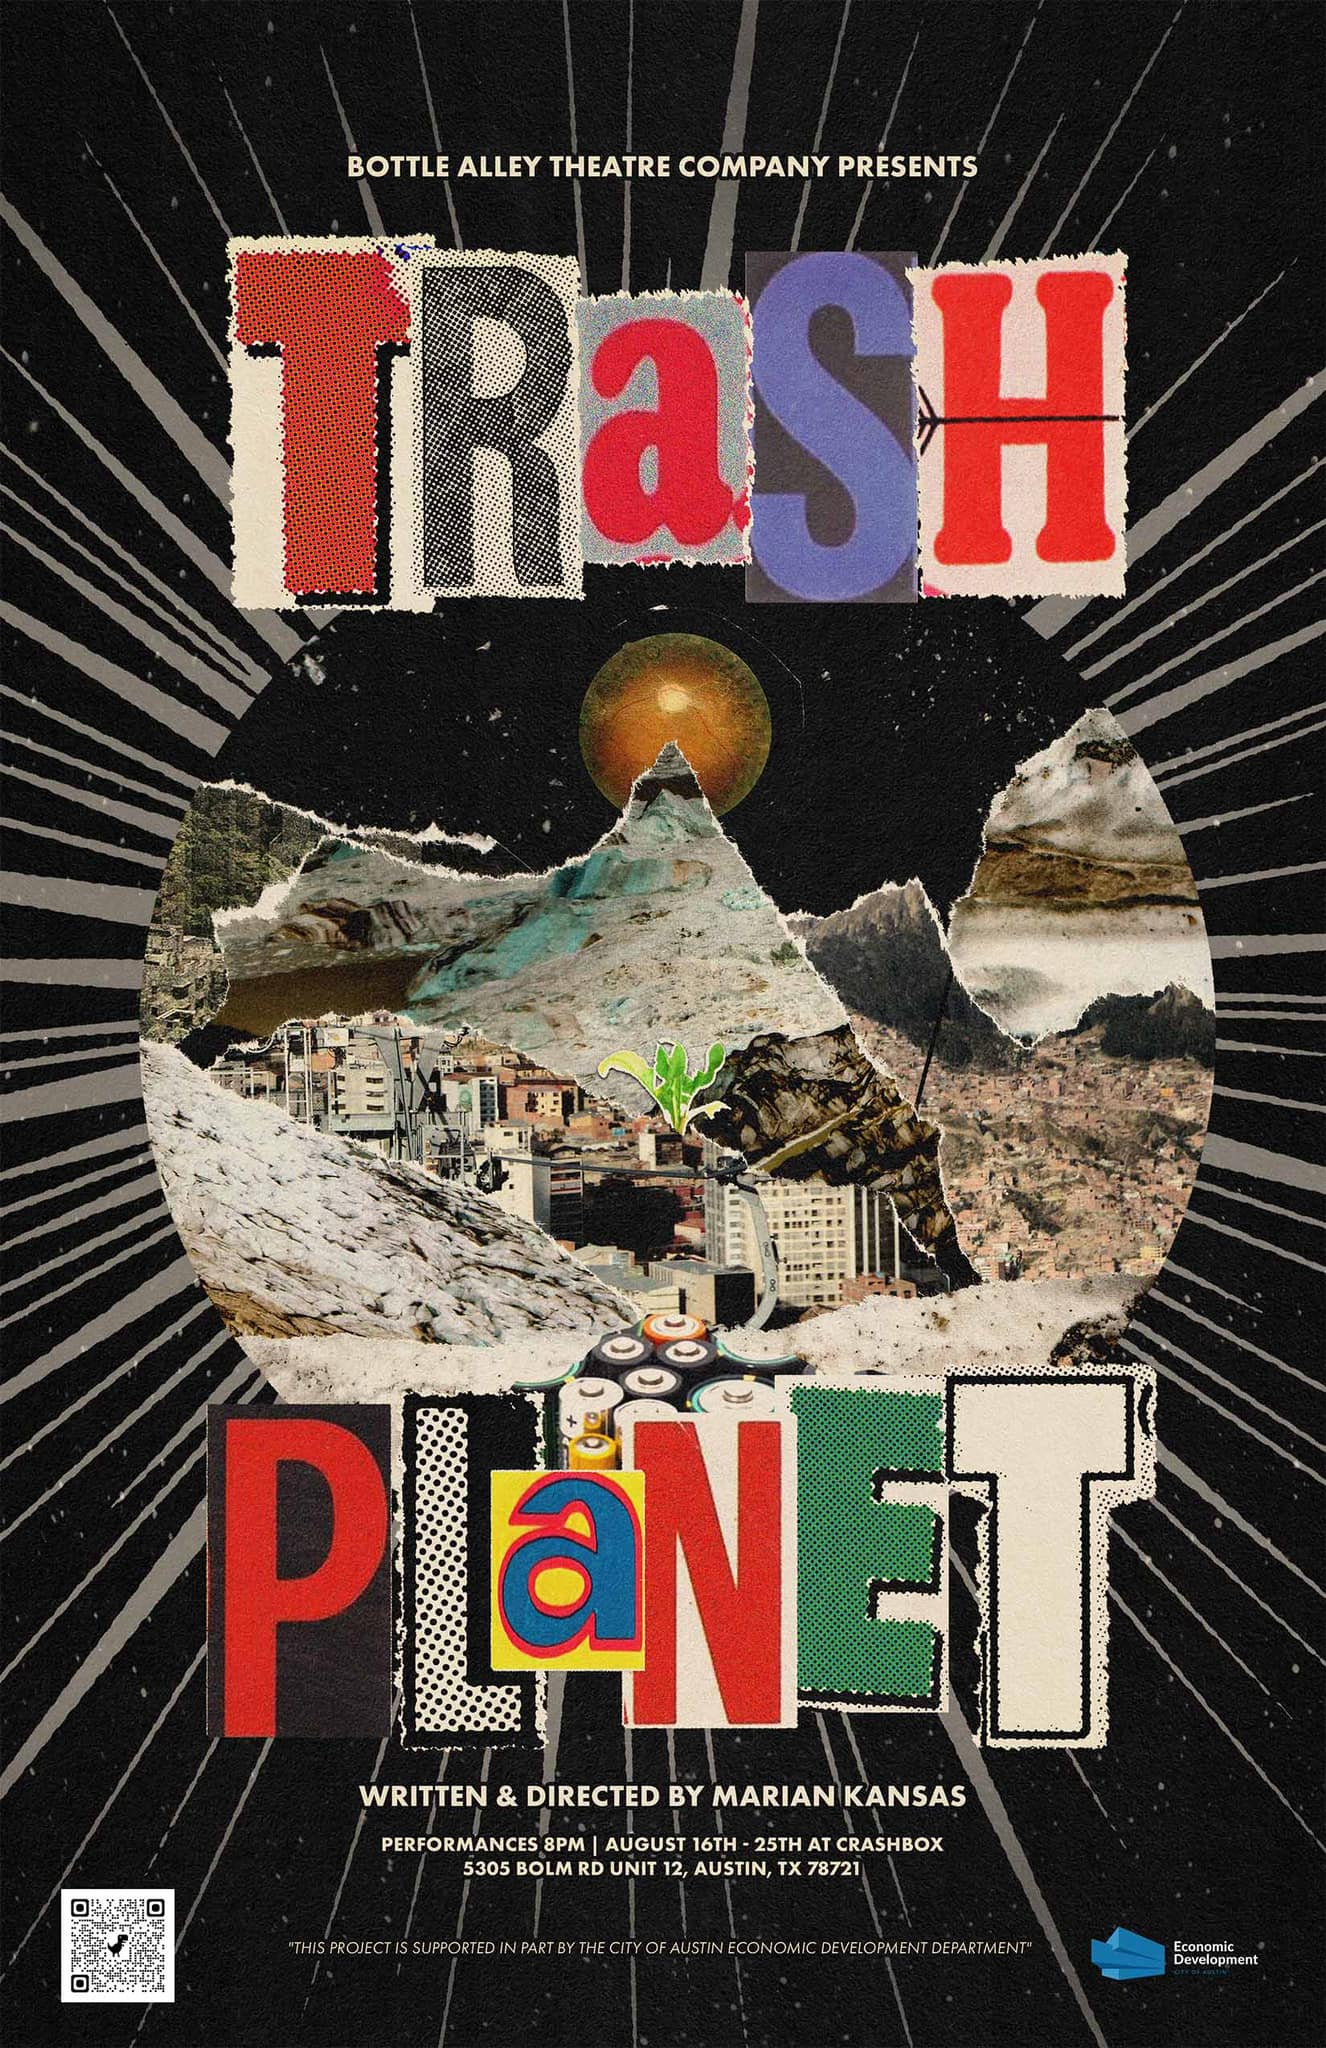 Trash Planet by Bottle Alley Theatre Company